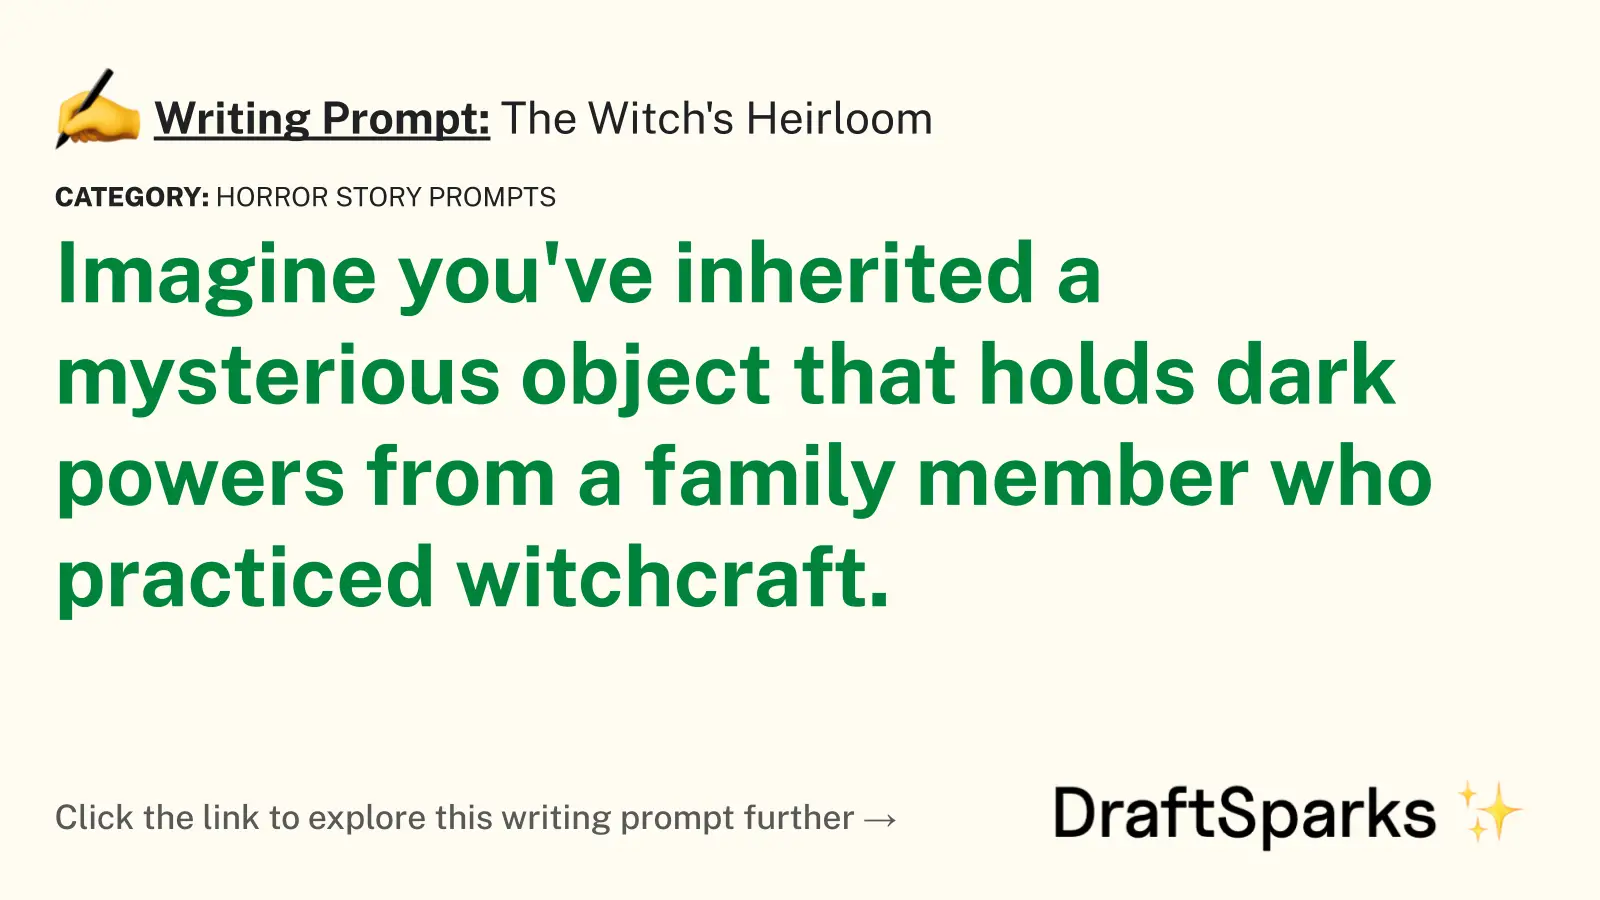 The Witch’s Heirloom